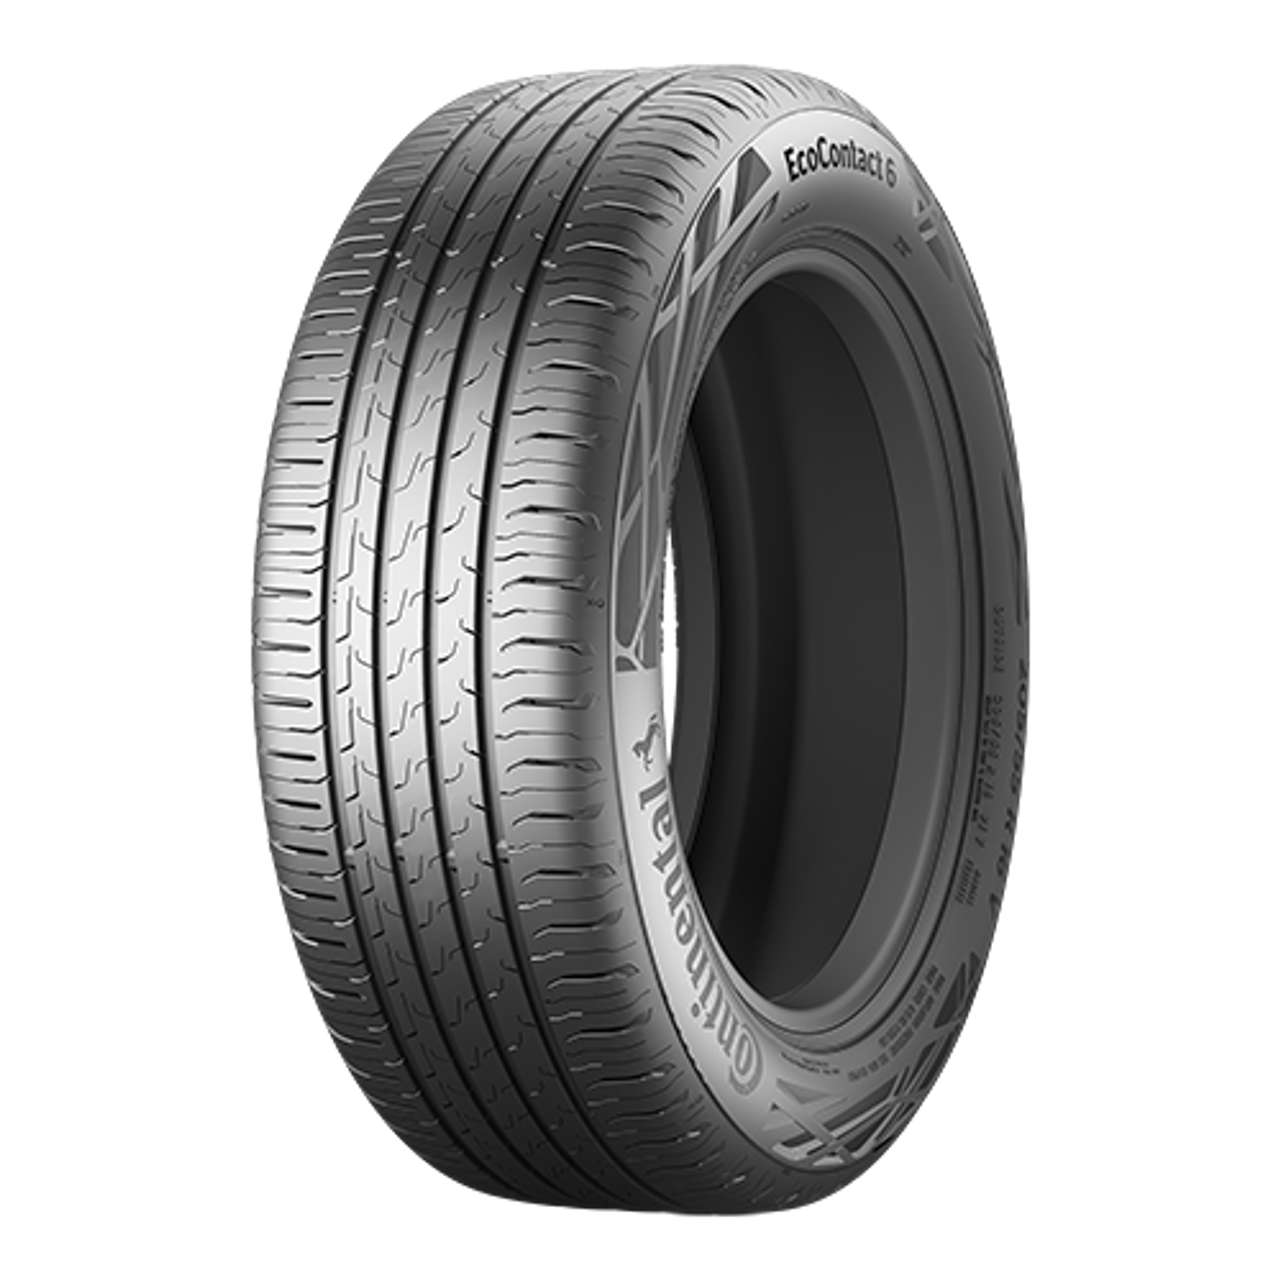 CONTINENTAL ECOCONTACT 6 175/80R14 88T 